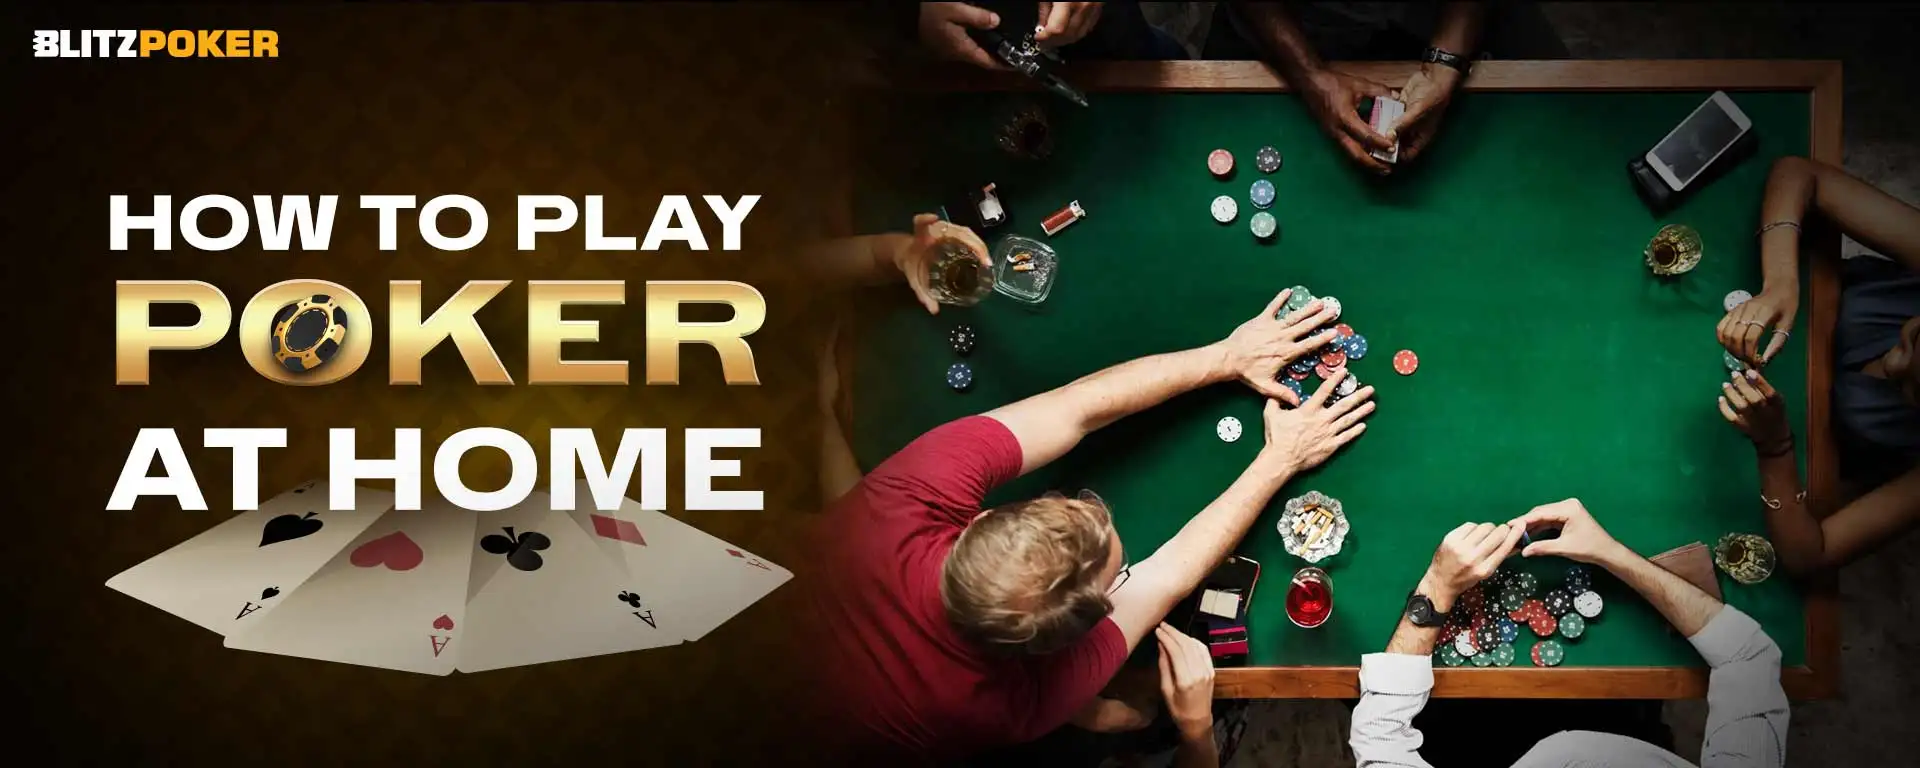 How to Play Poker at Home : Gameplay Preparation